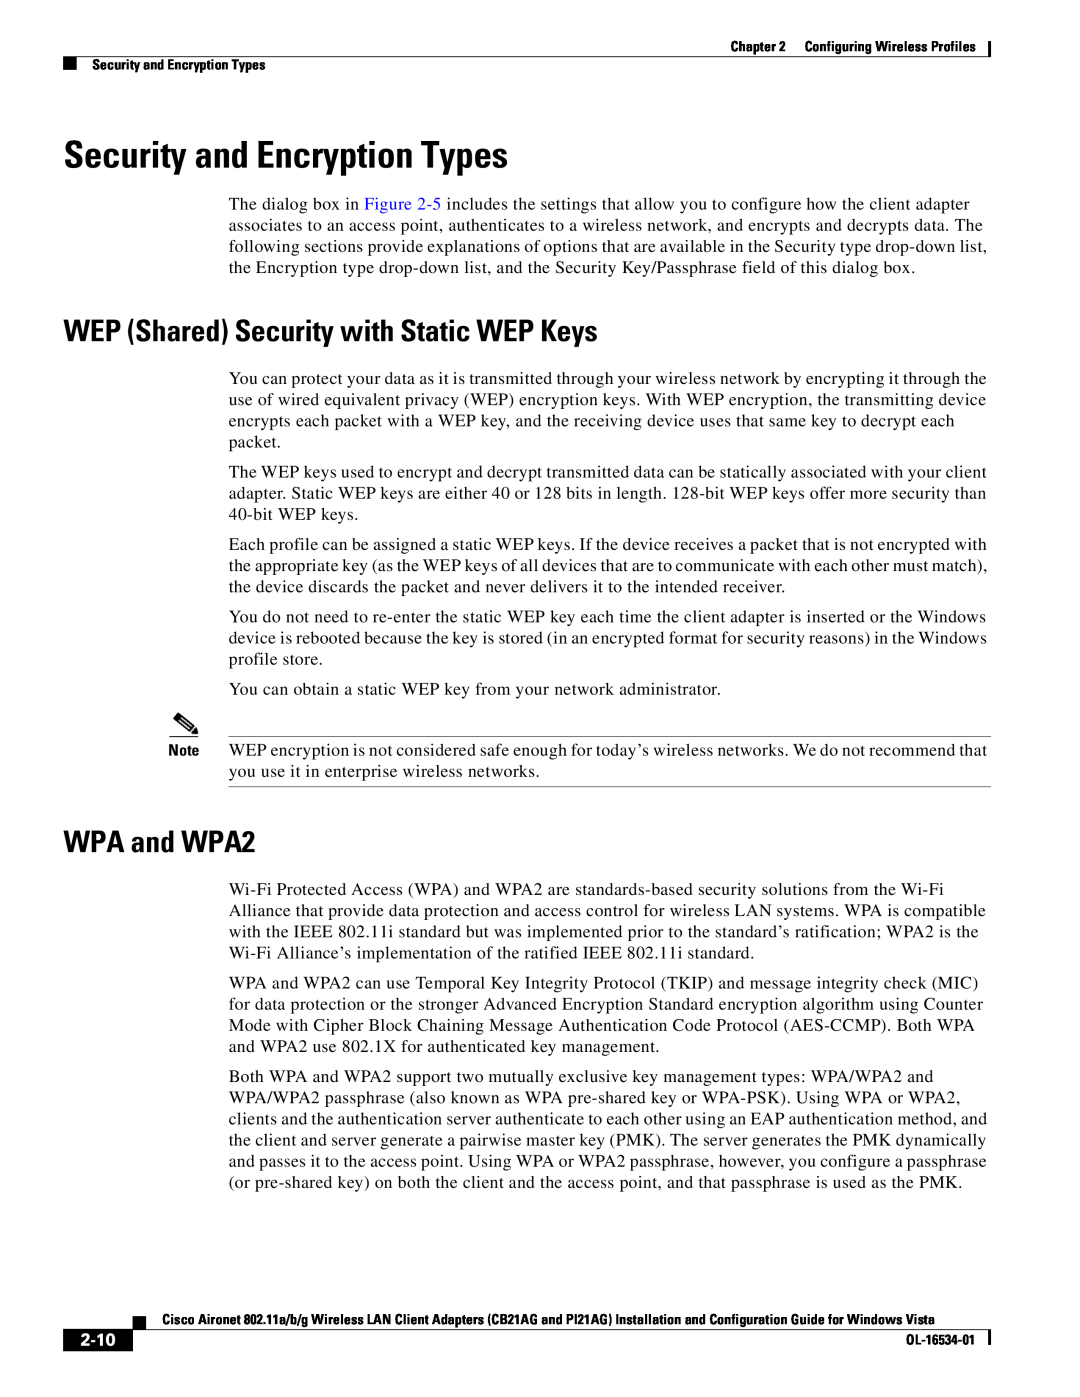 Cisco Systems PI21AG, CB21AG Security and Encryption Types, WEP Shared Security with Static WEP Keys, WPA and WPA2, 2-10 